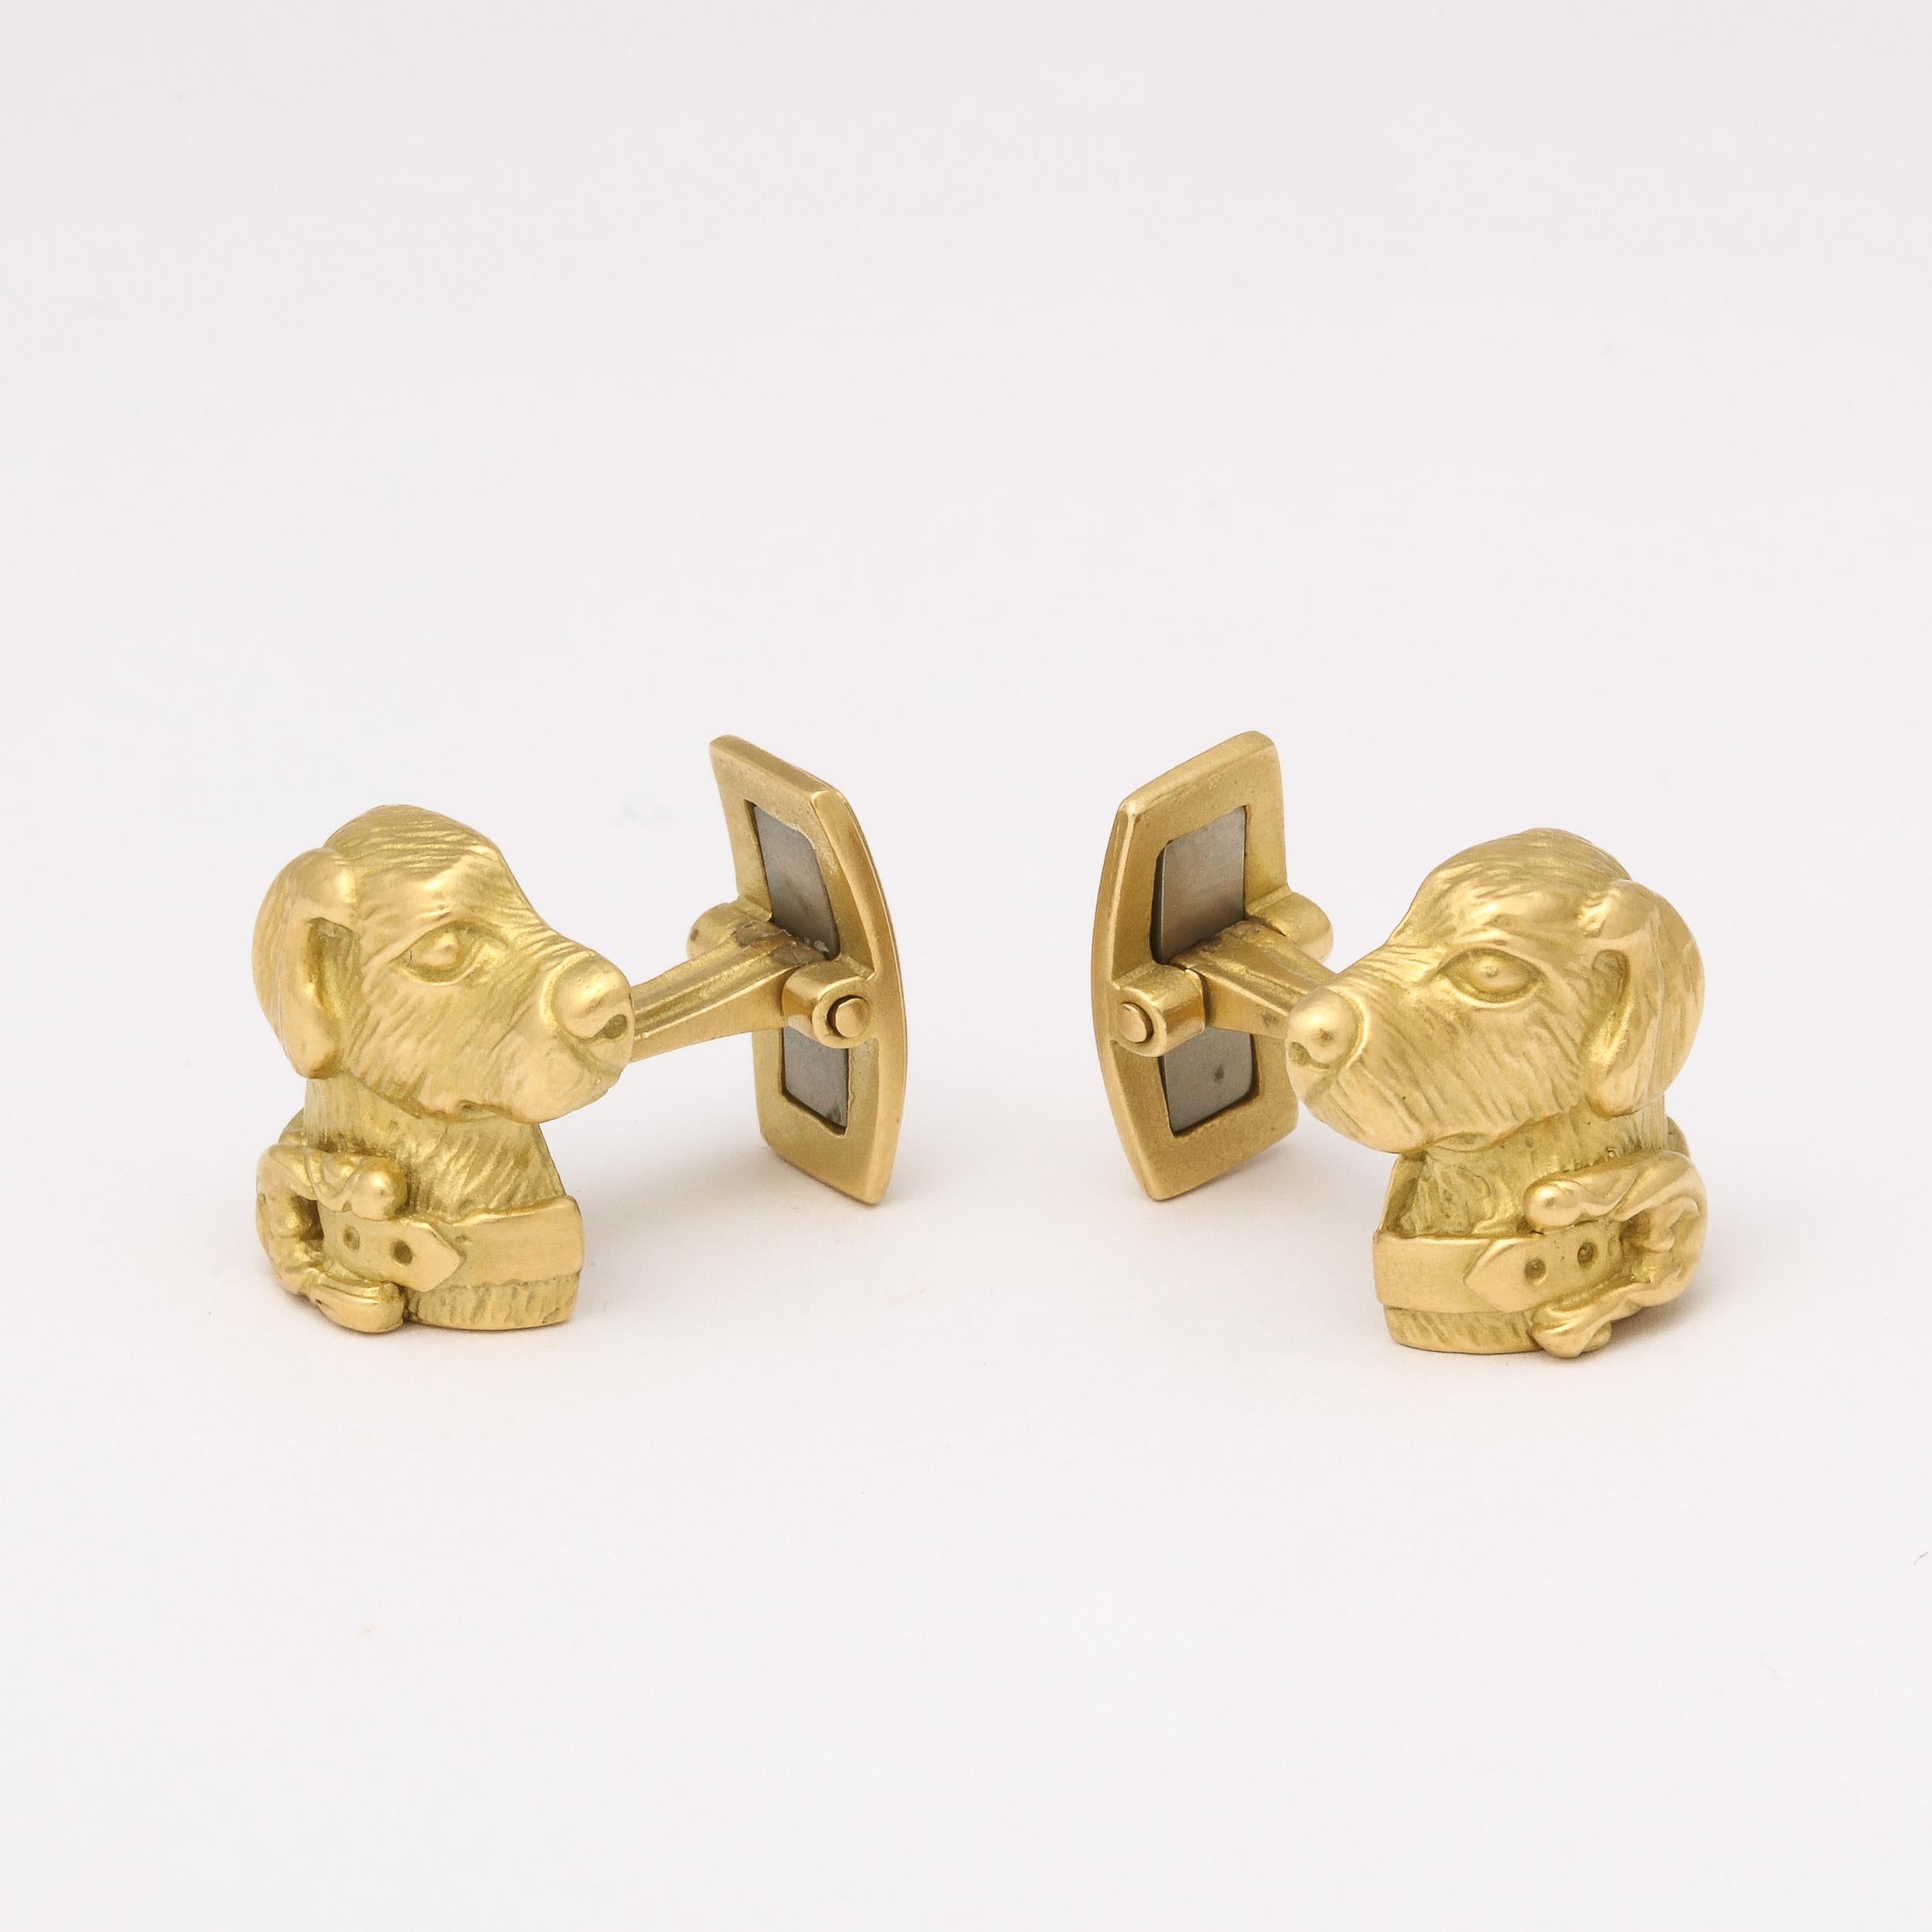 Contemporary Modernist Cufflinks with Golden Retriever Canine Motif in 14 Carat Yellow Gold For Sale